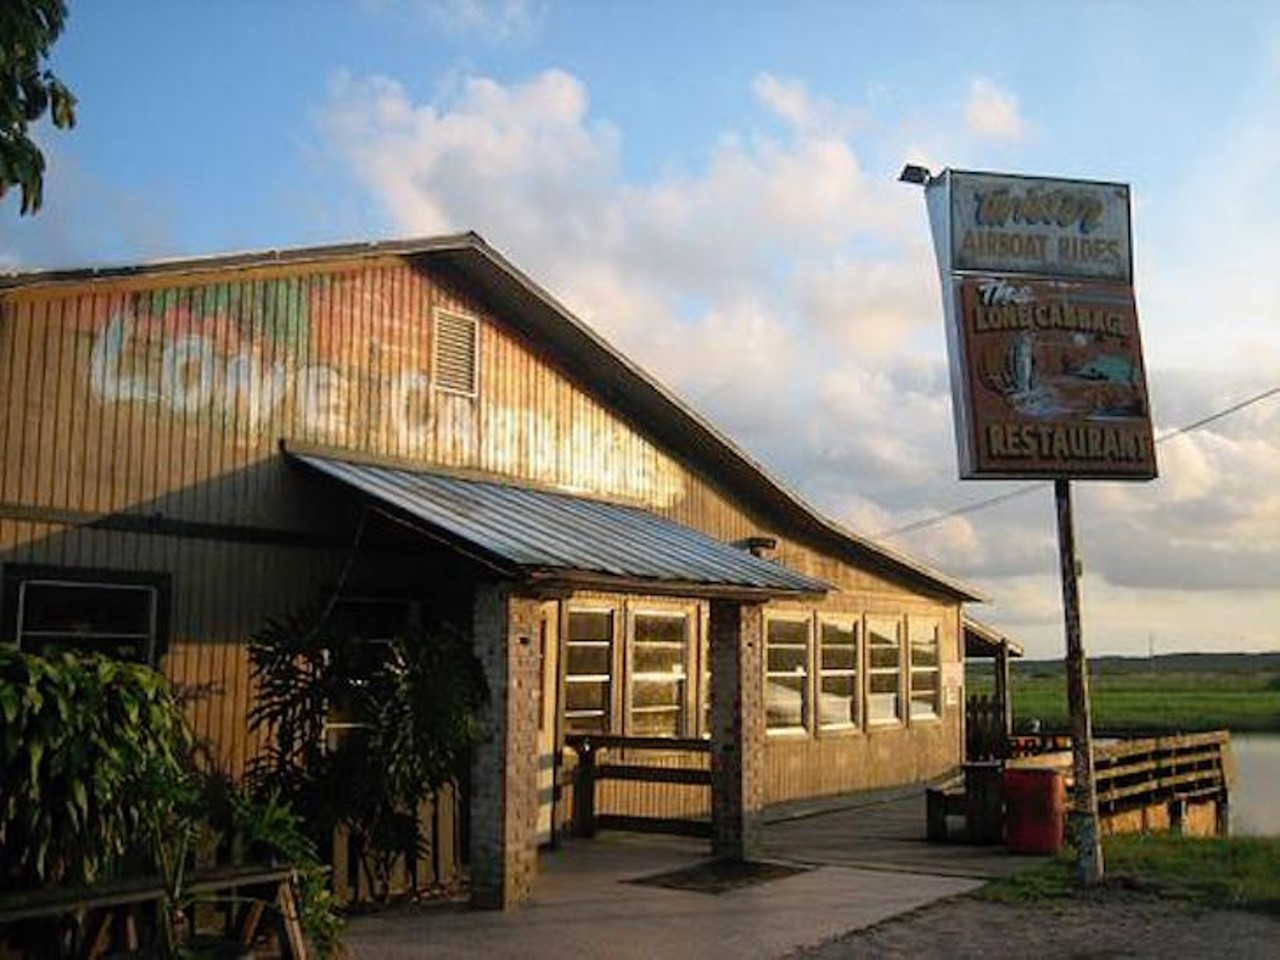 Lone Cabbage Fish Camp
8199 State Road 520, Cocoa, 321-632-4199
Airboat rides, hush puppies, gator, and country music? Lone Cabbage Fish Camp might just have it all.
Photo via Lone Cabbage/FB